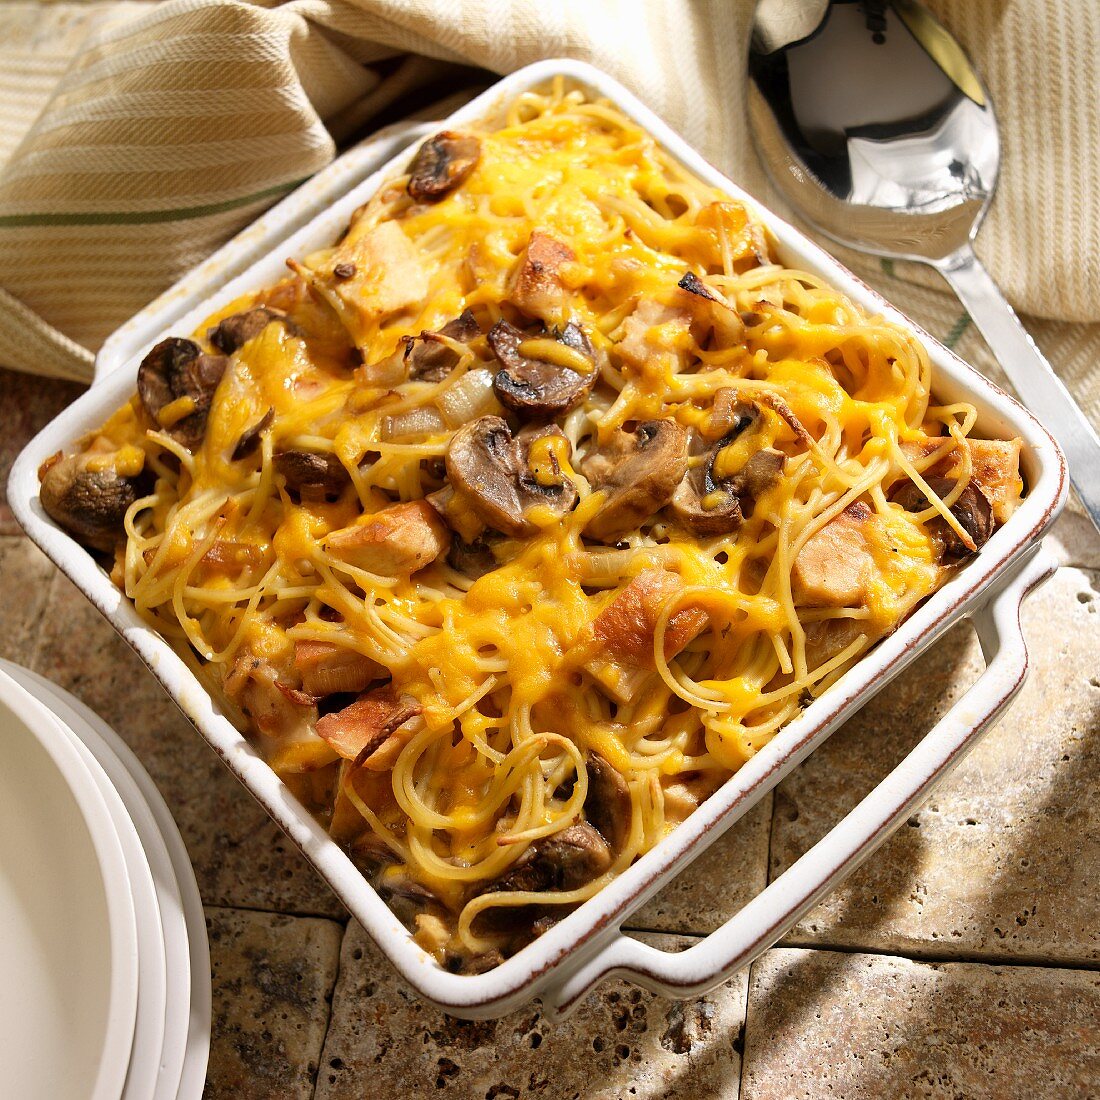 Chicken tetrazzini with pasta, cheese and mushrooms